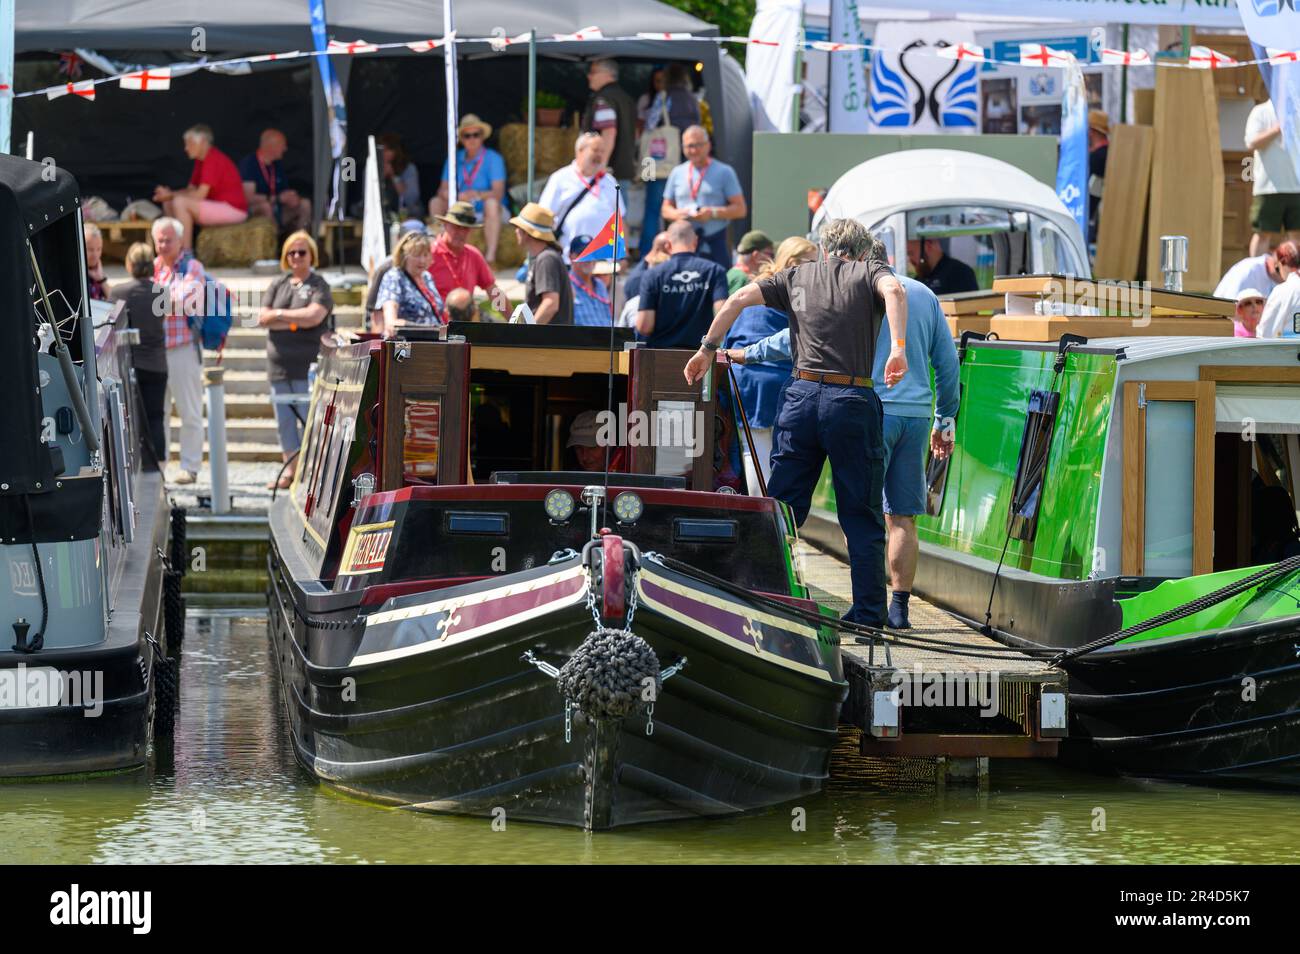 Bright sunshine greeted the crowds visiting the Crick Boat Show taking place over the bank holiday weekend close to the Grand Union Canal in Northamptonshire. Stock Photo